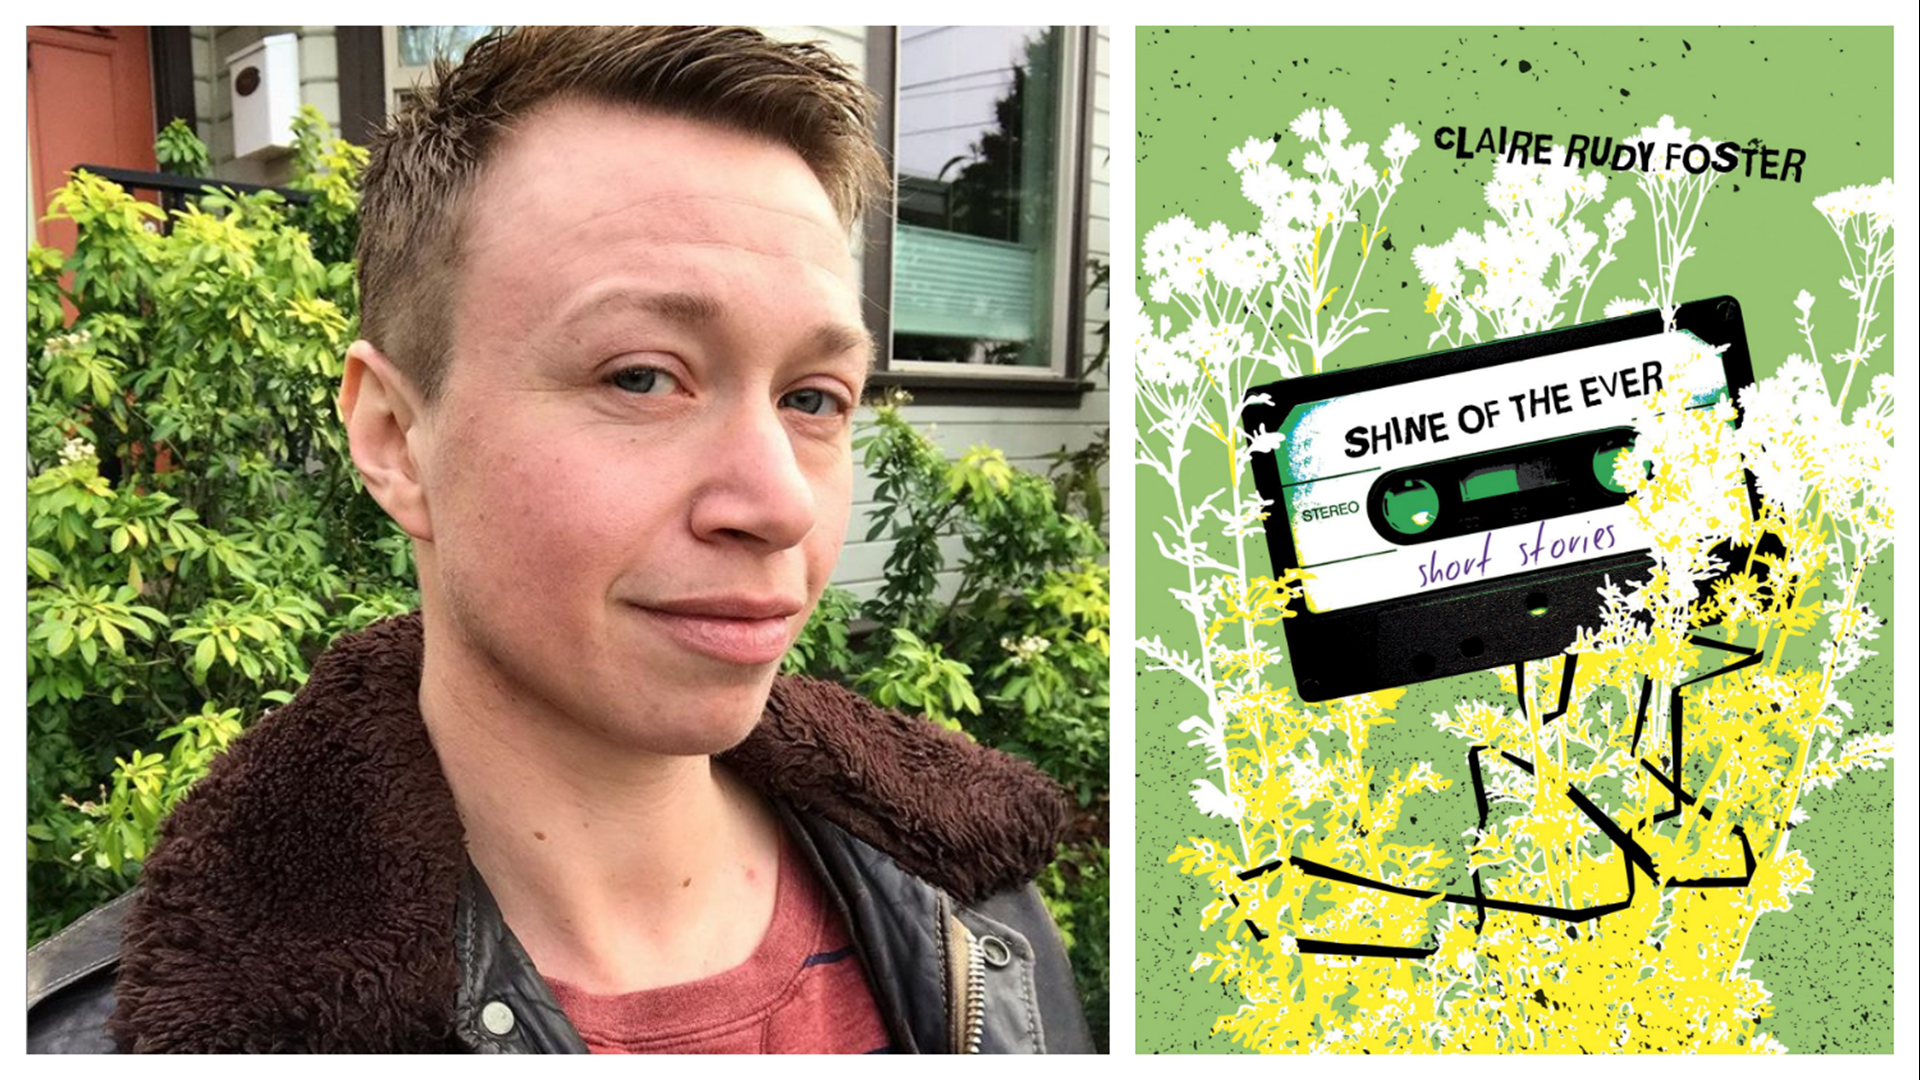 Claire Rudy Foster's "Shine of the Ever" is described as a literary mix tape of queer voices.